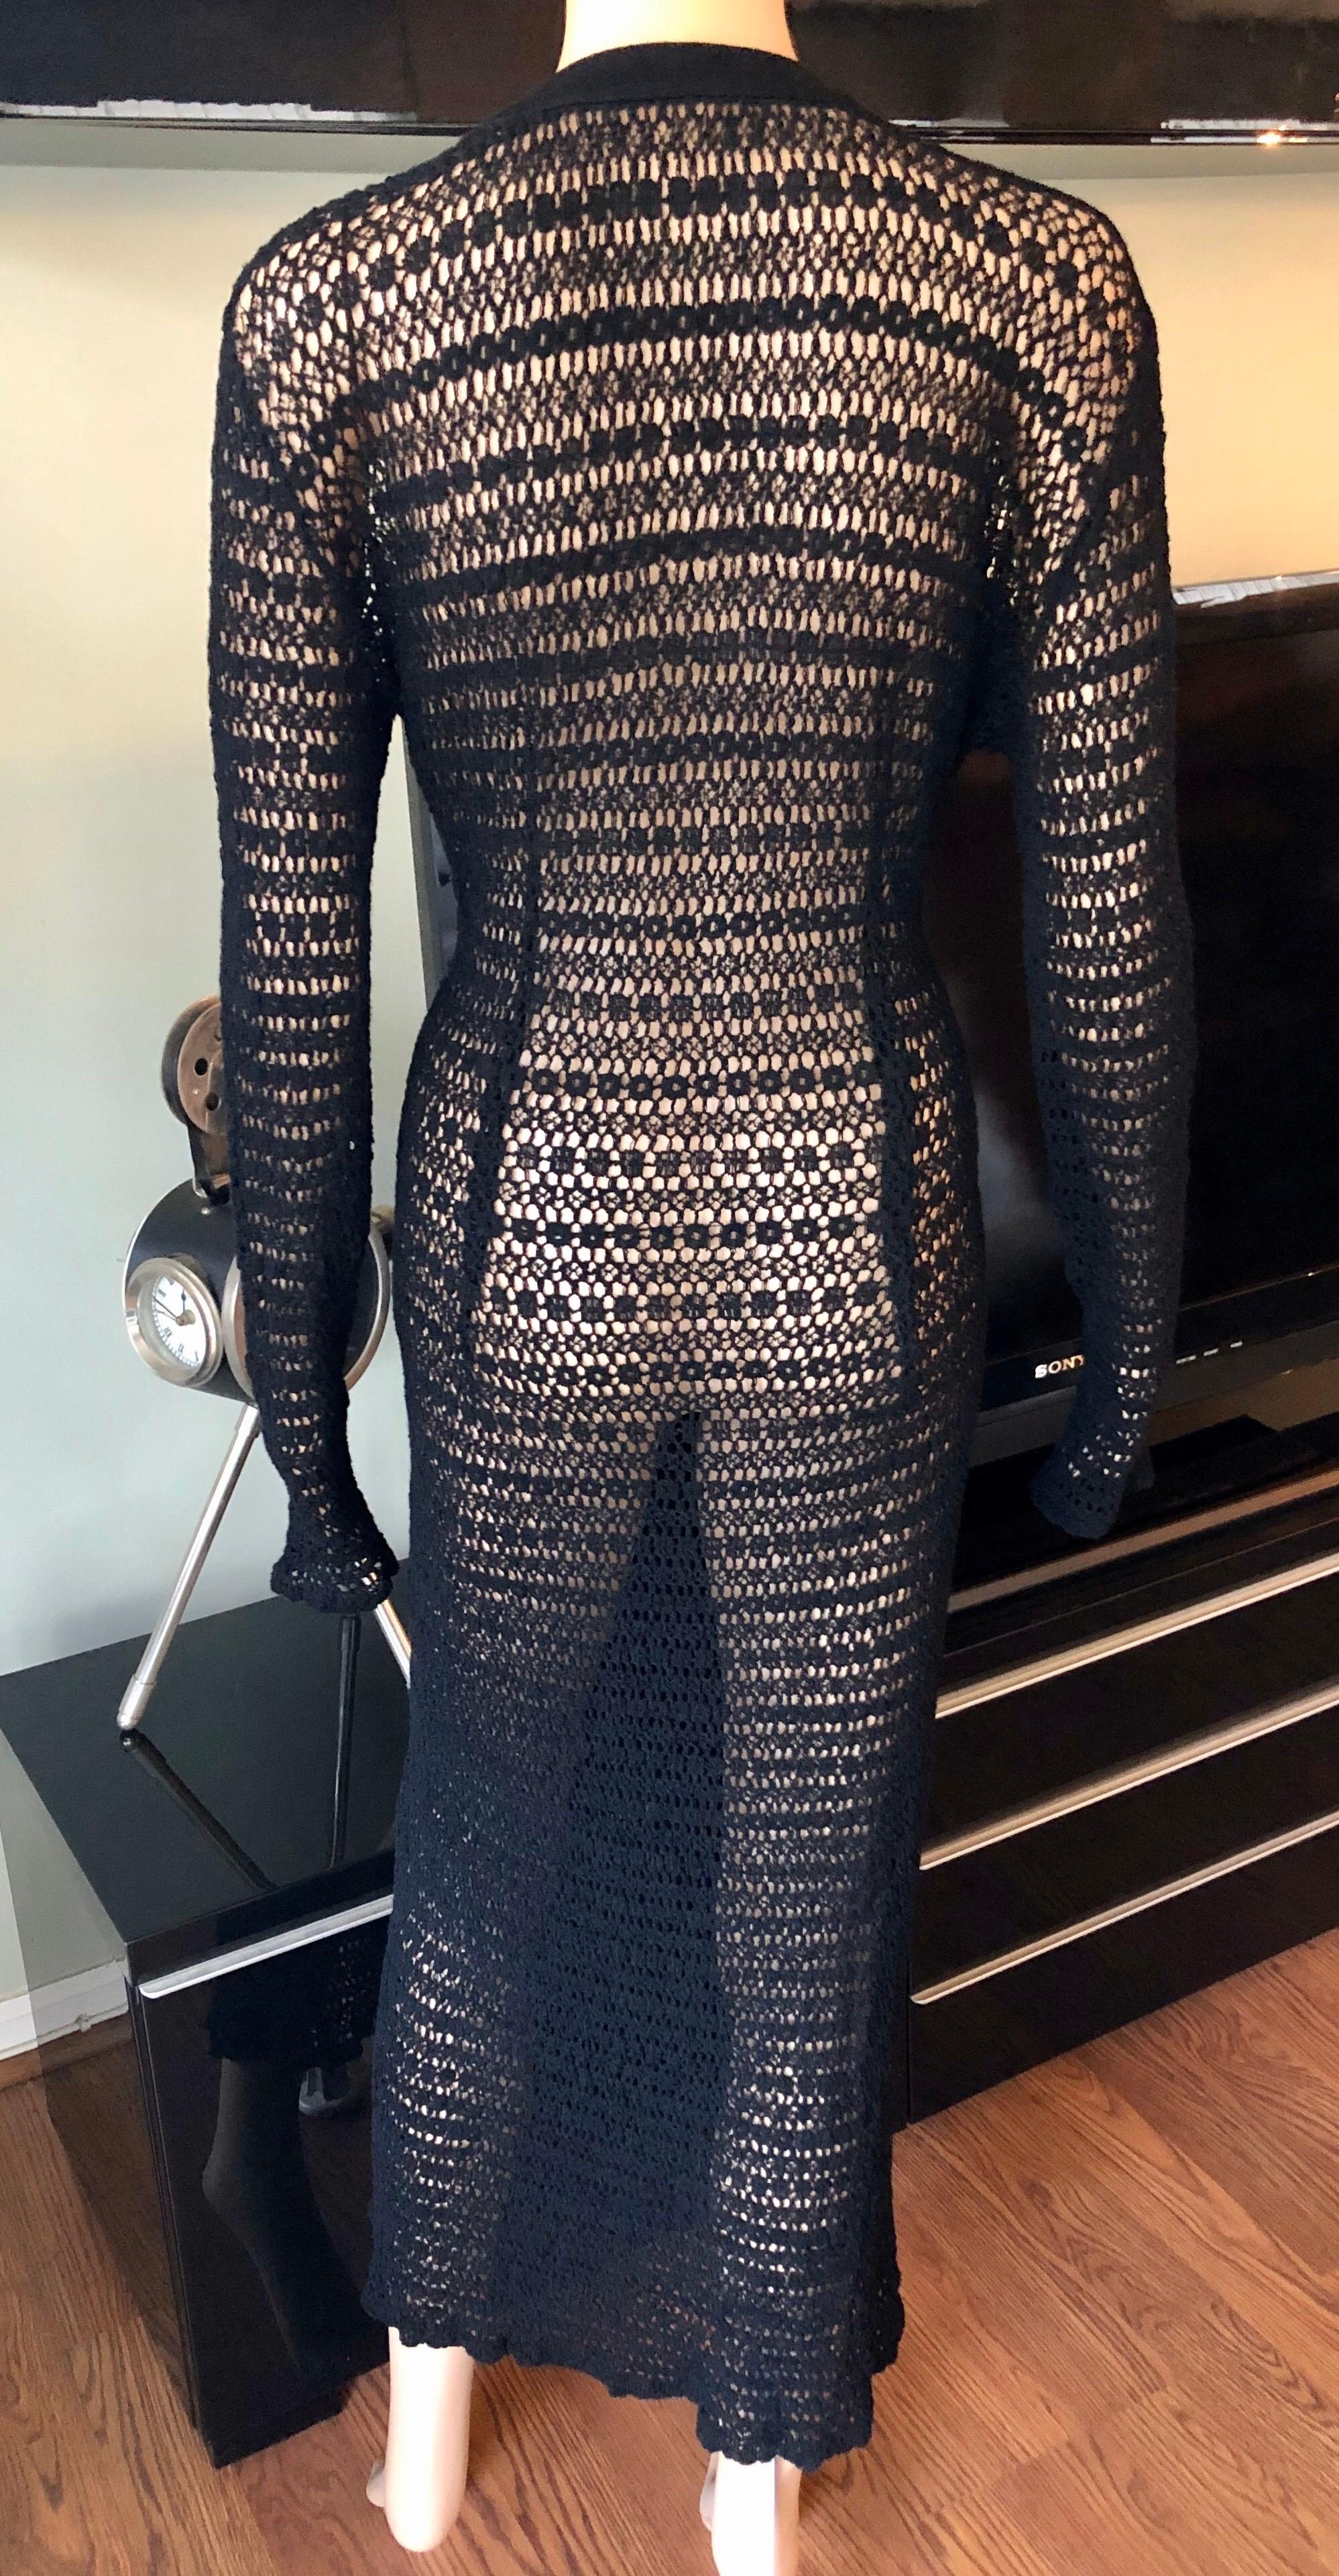 dolce & gabbana gray knit long sleeve top with sheer cream attached underlayer.